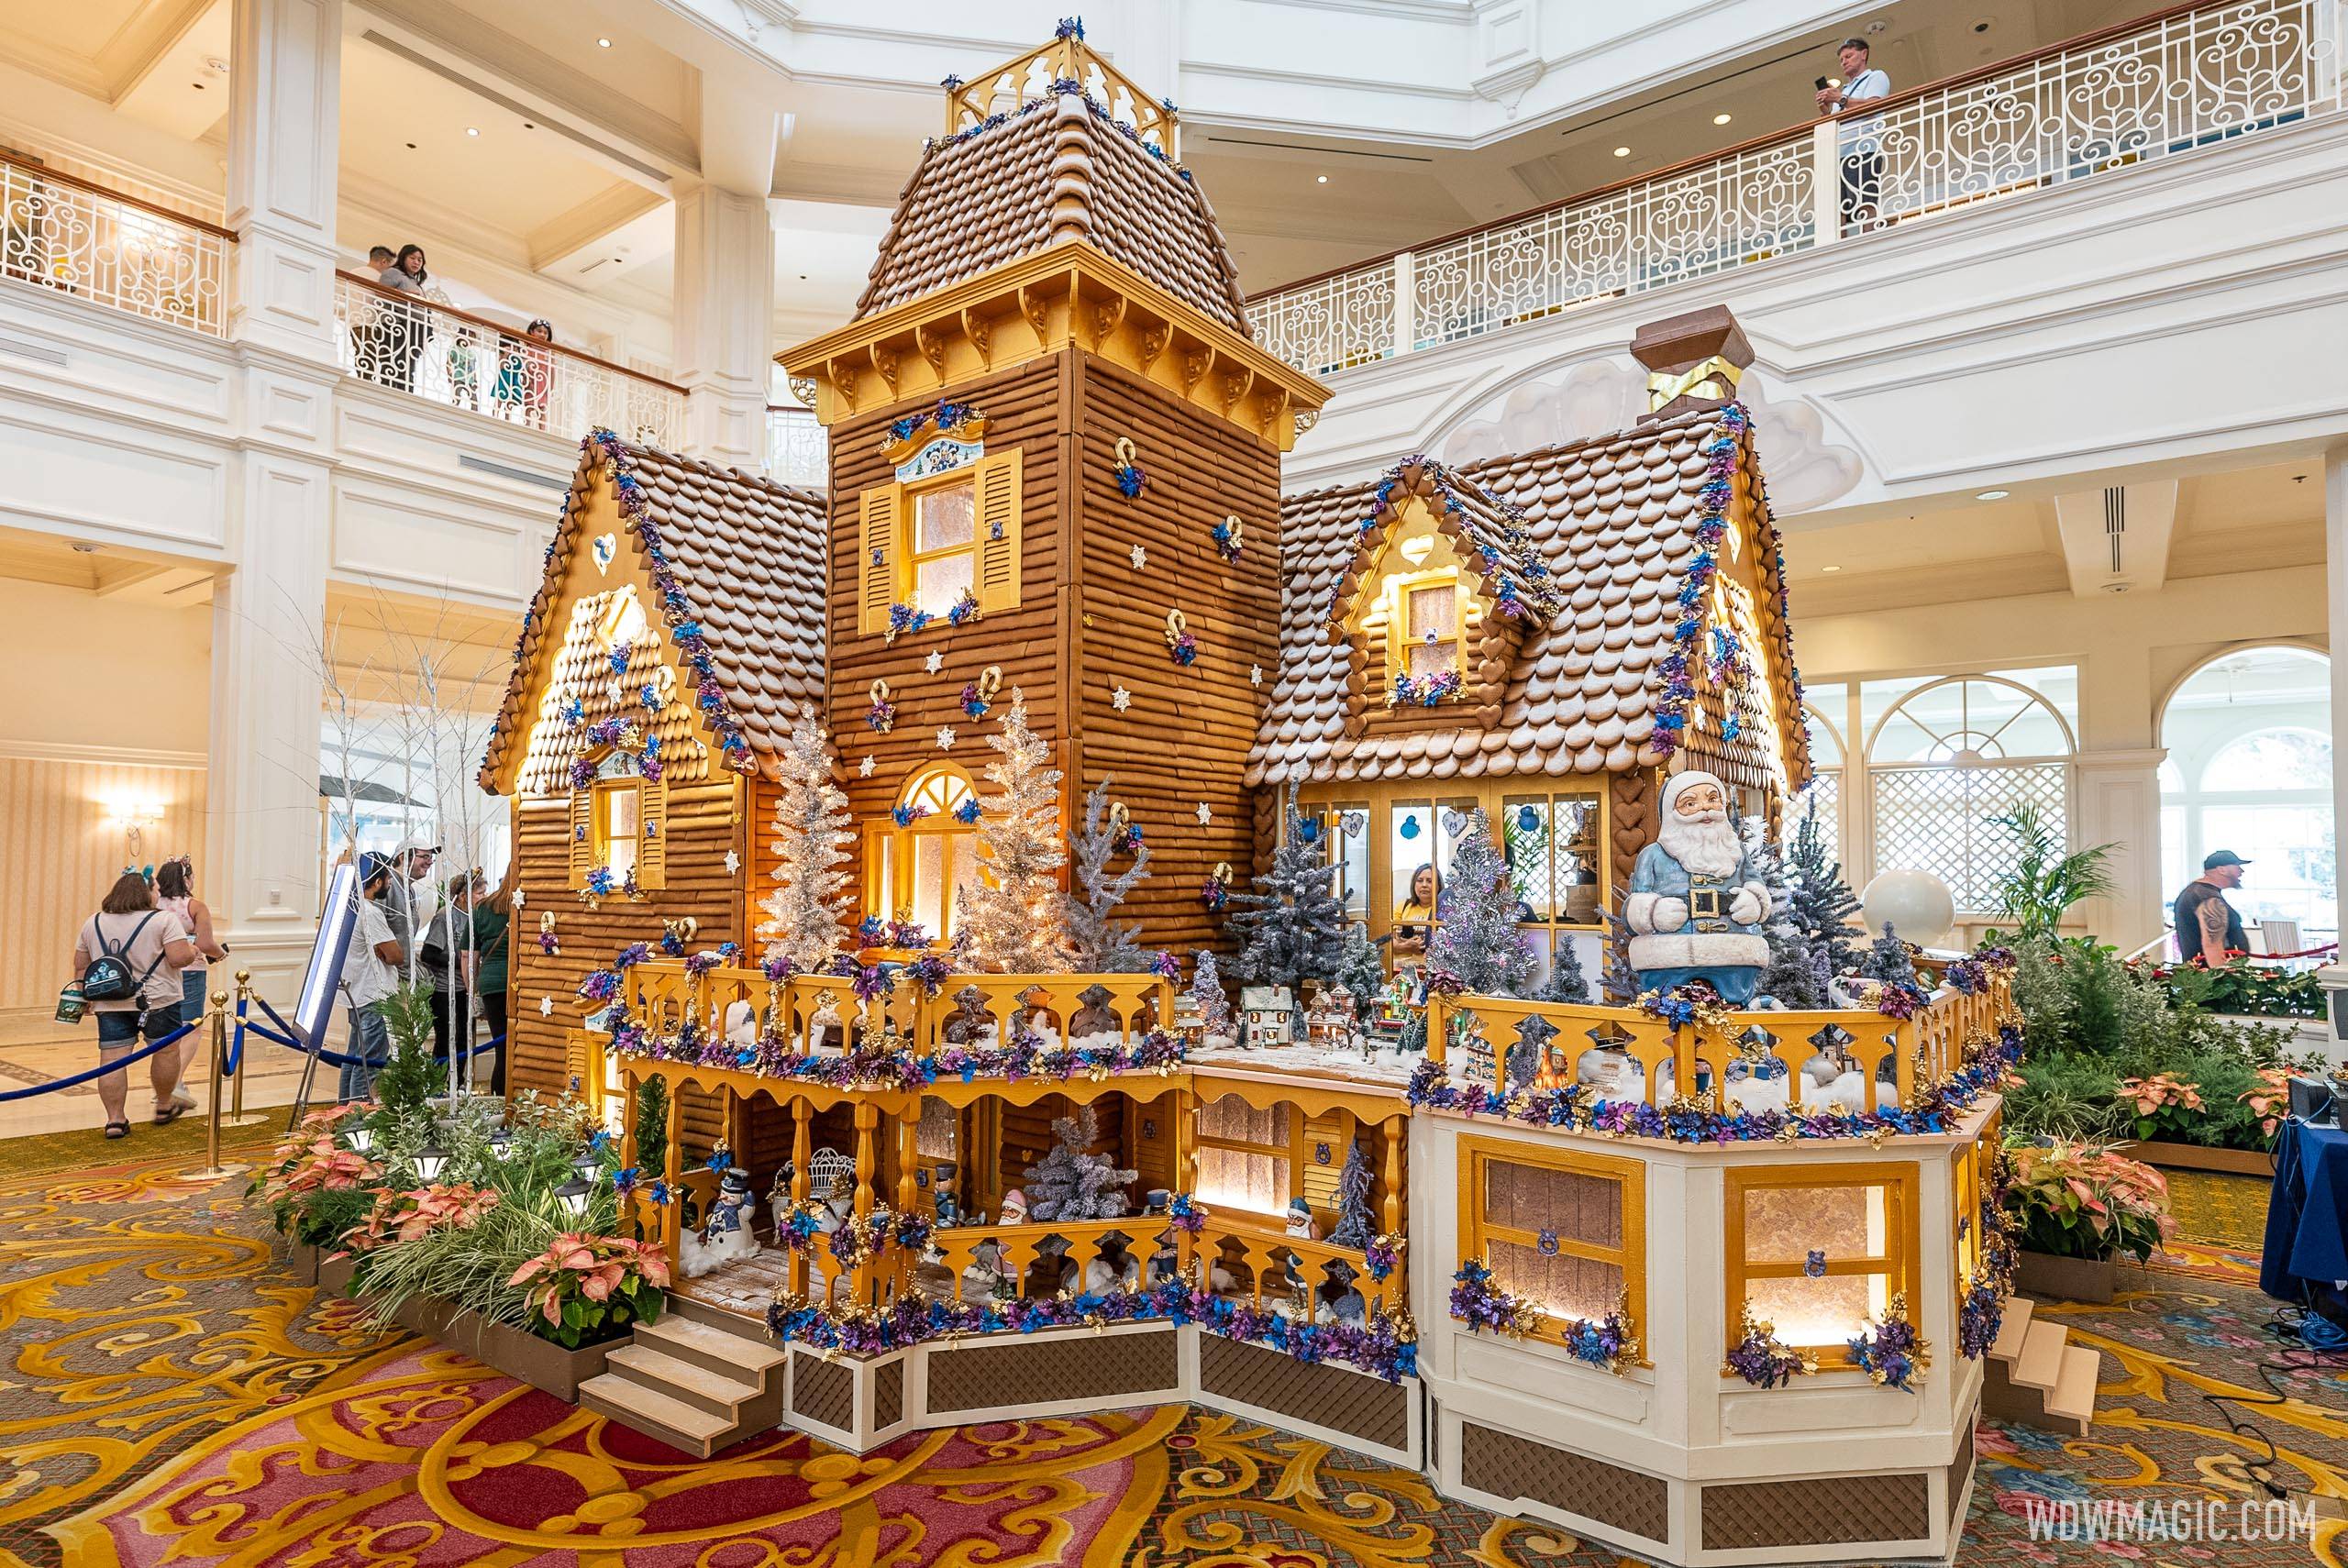 A look at the 2022 life-sized Gingerbread House at Disney's Grand Floridian Resort